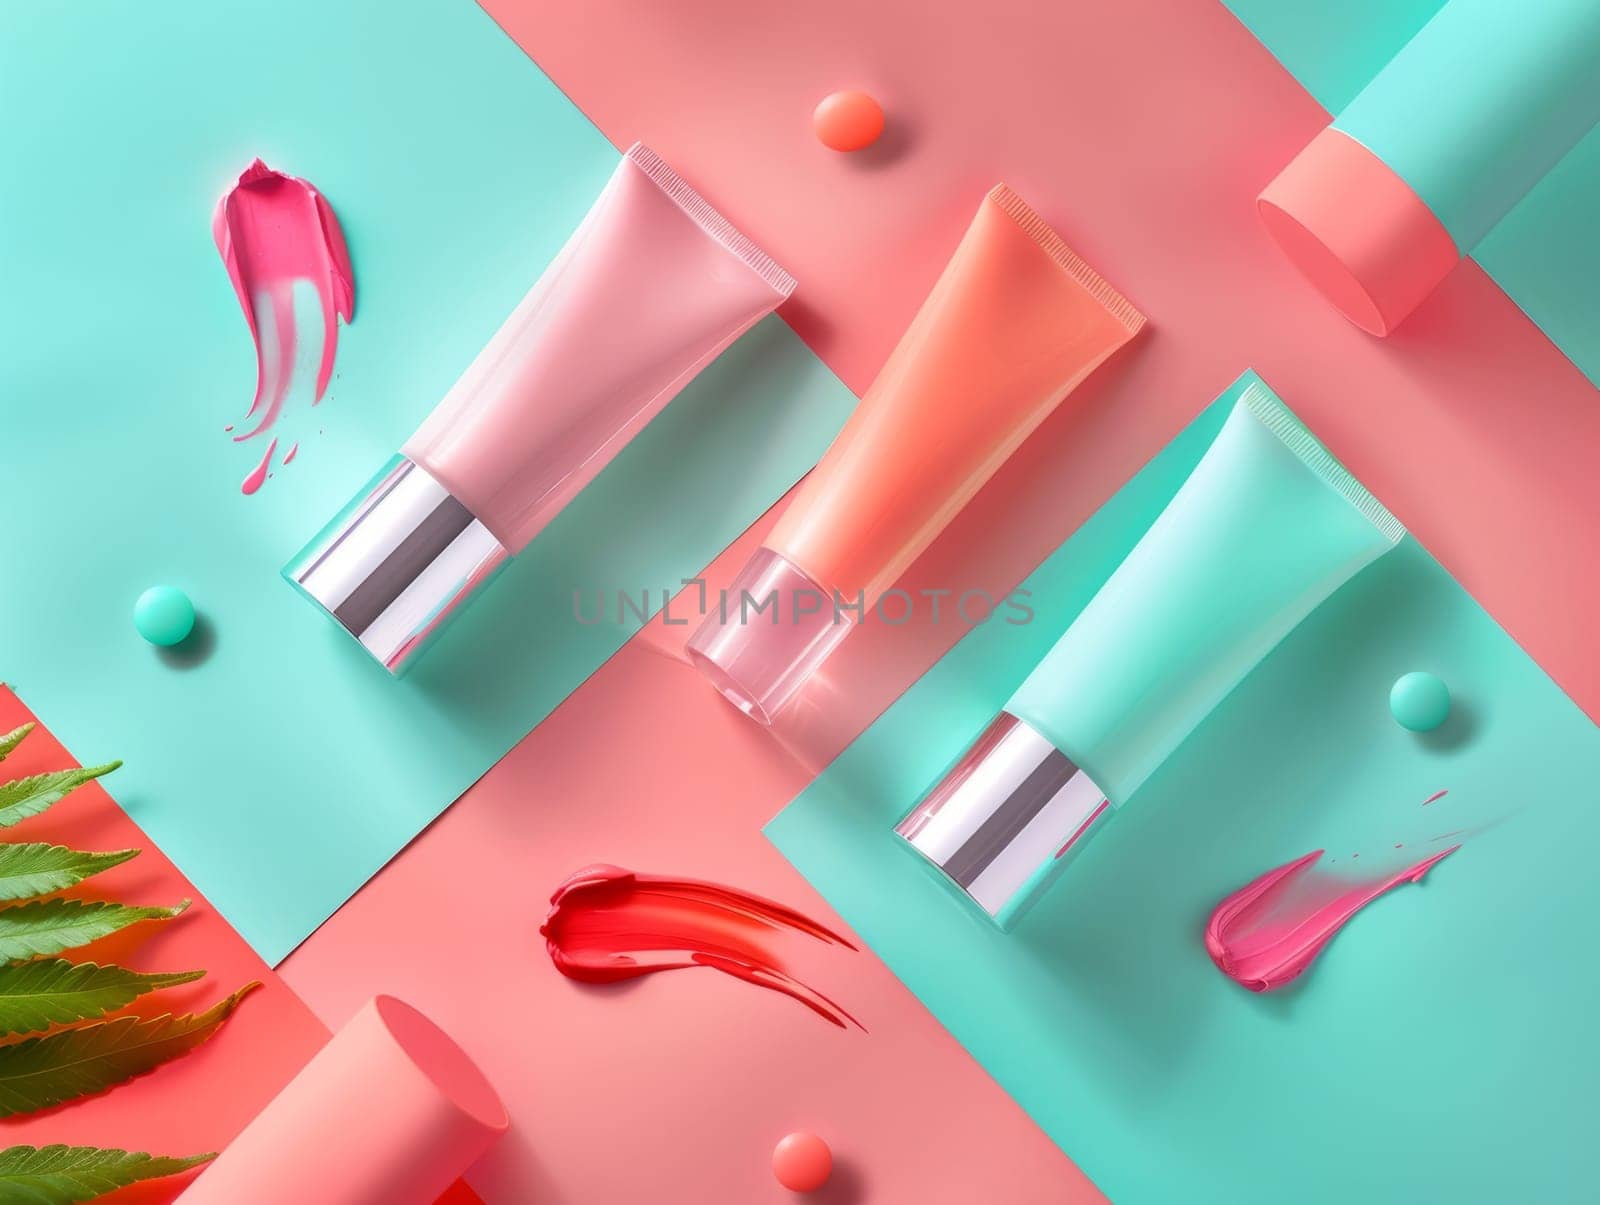 Colourful Bright Cosmetic and Body Care Products Mockup. Luxury Modern Product Presentation. by iliris